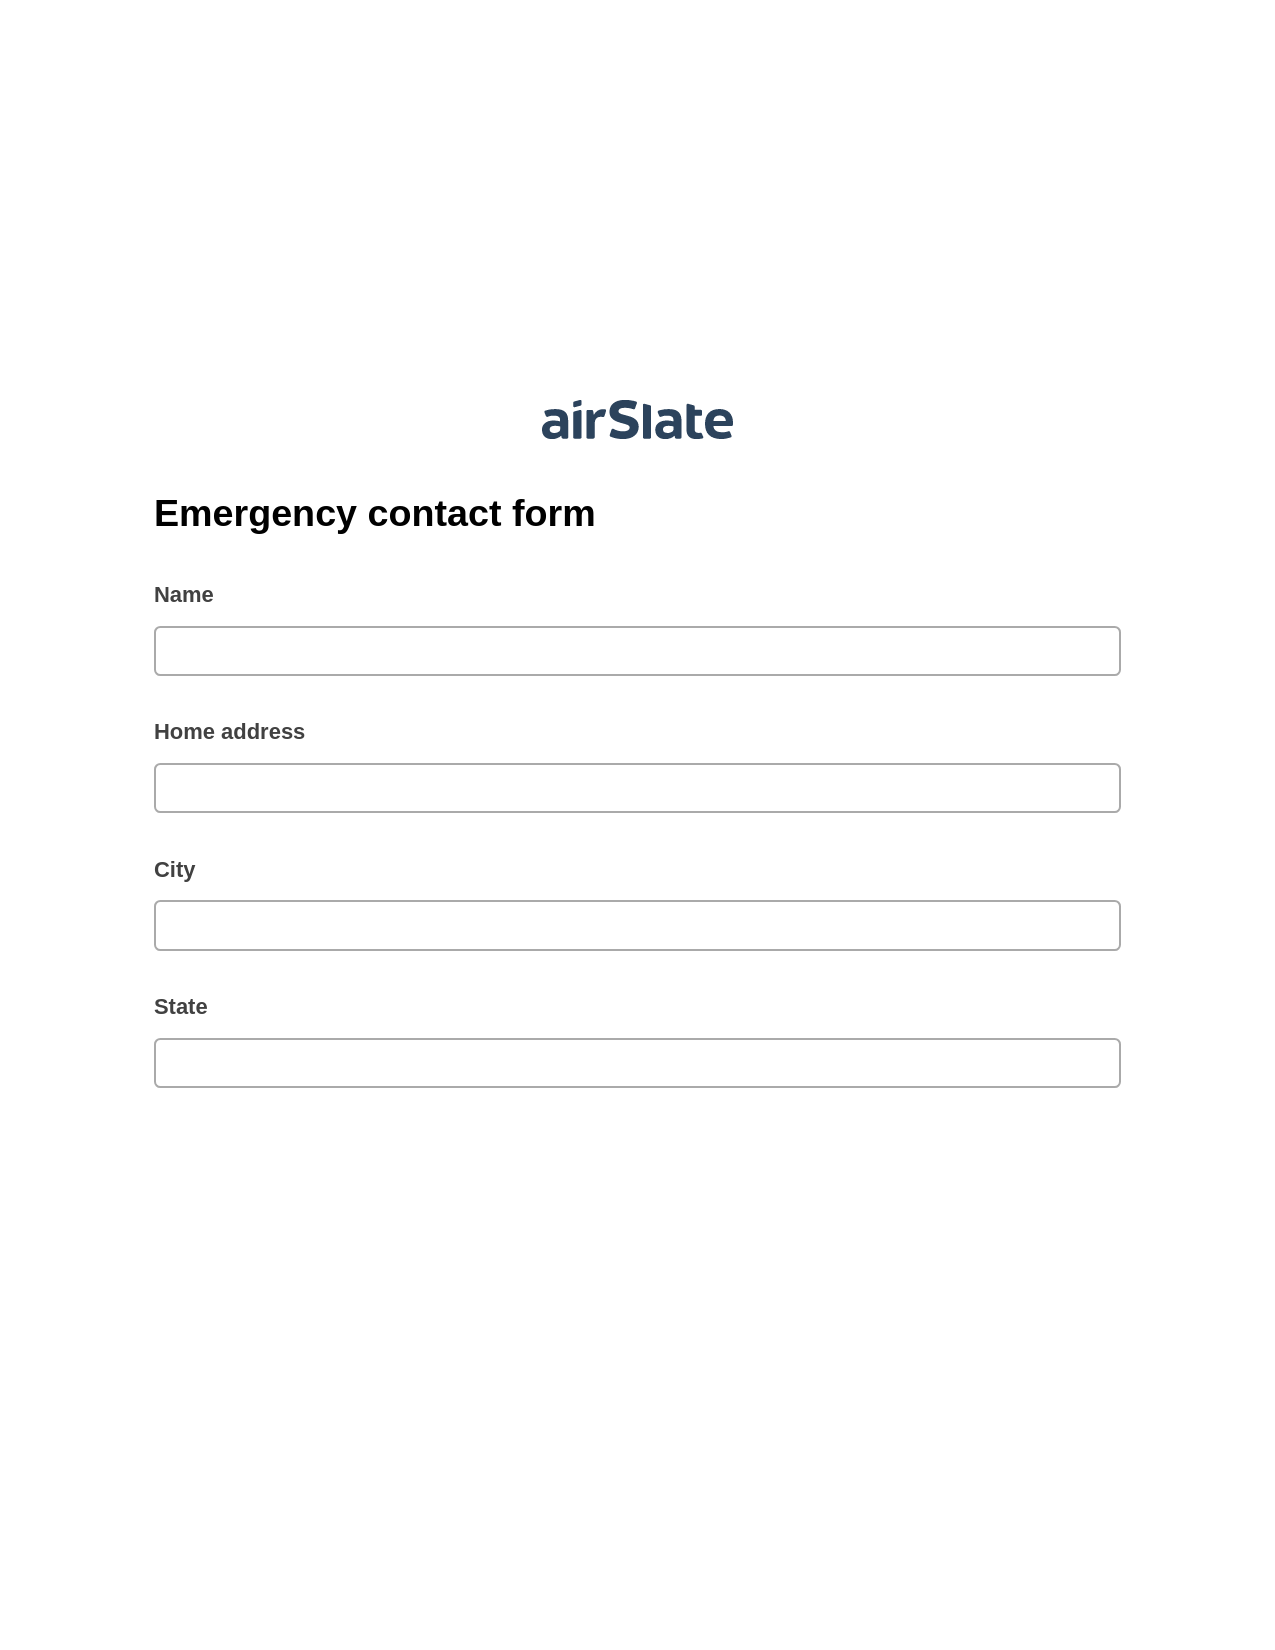 Multirole Emergency contact form Pre-fill Slate from MS Dynamics 365 Records Bot, Reminder Bot, Email Notification Postfinish Bot